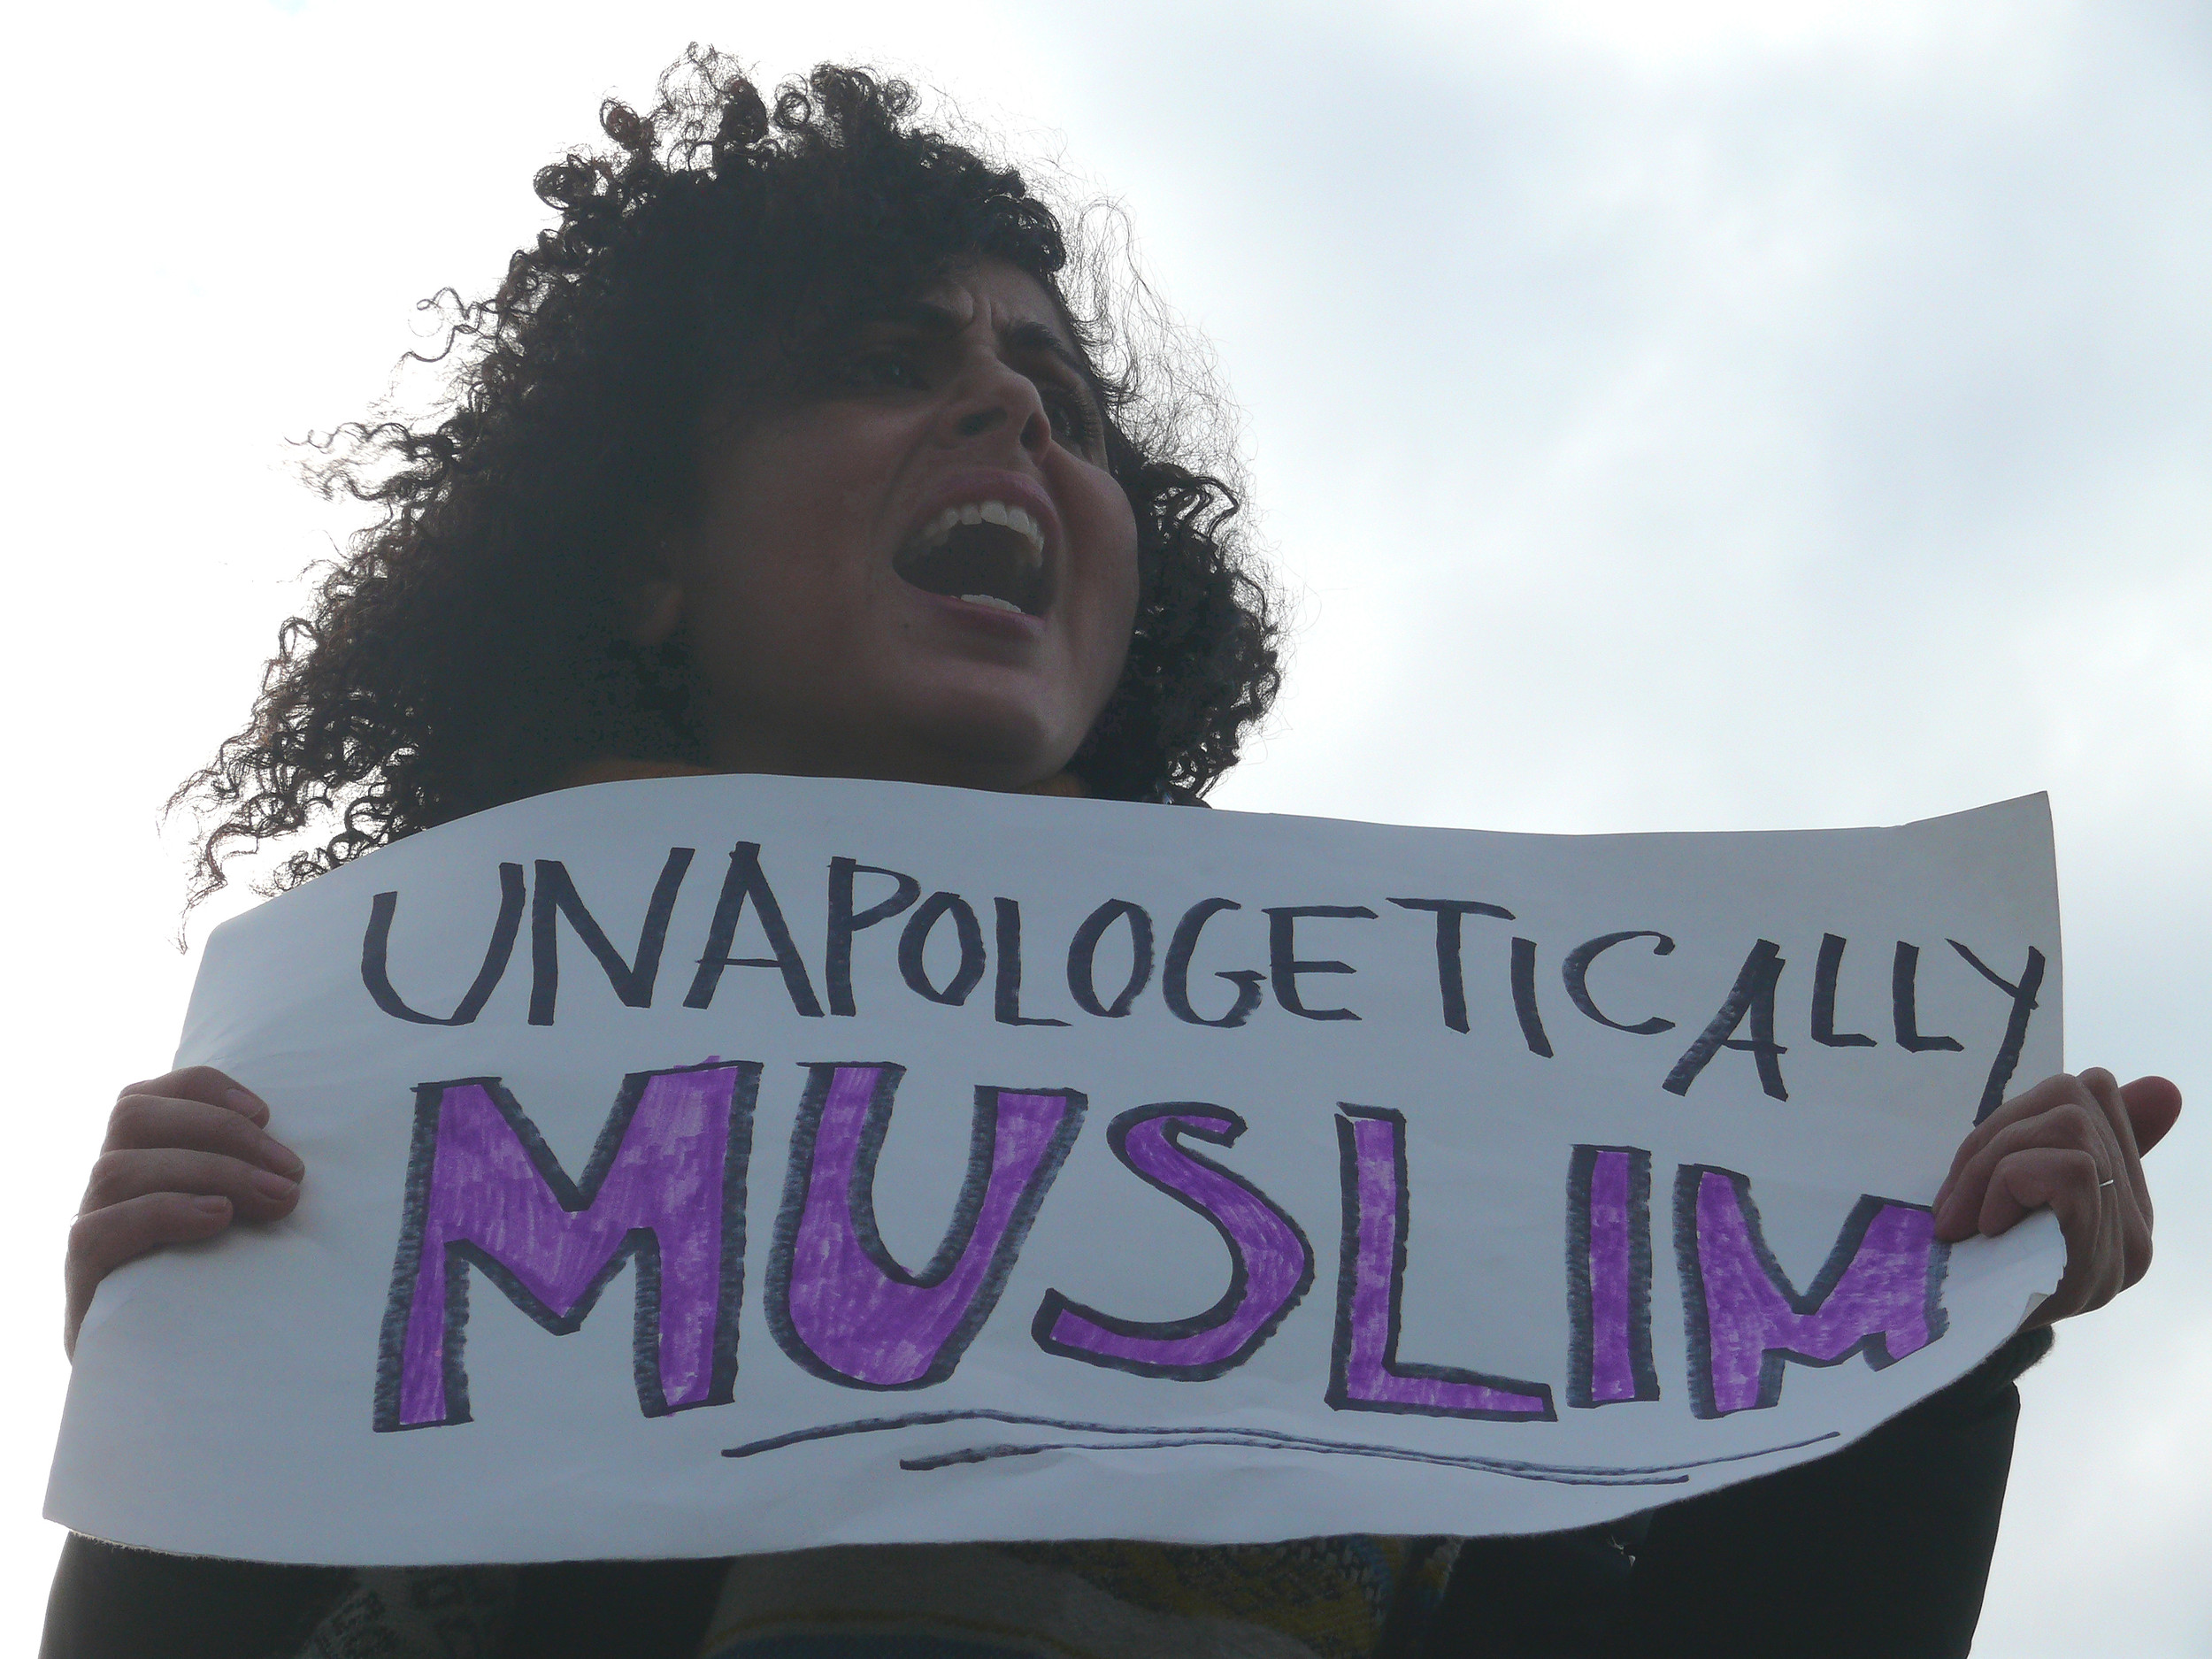 A Muslim protester made her sentiments clear on Sunday at JFK.